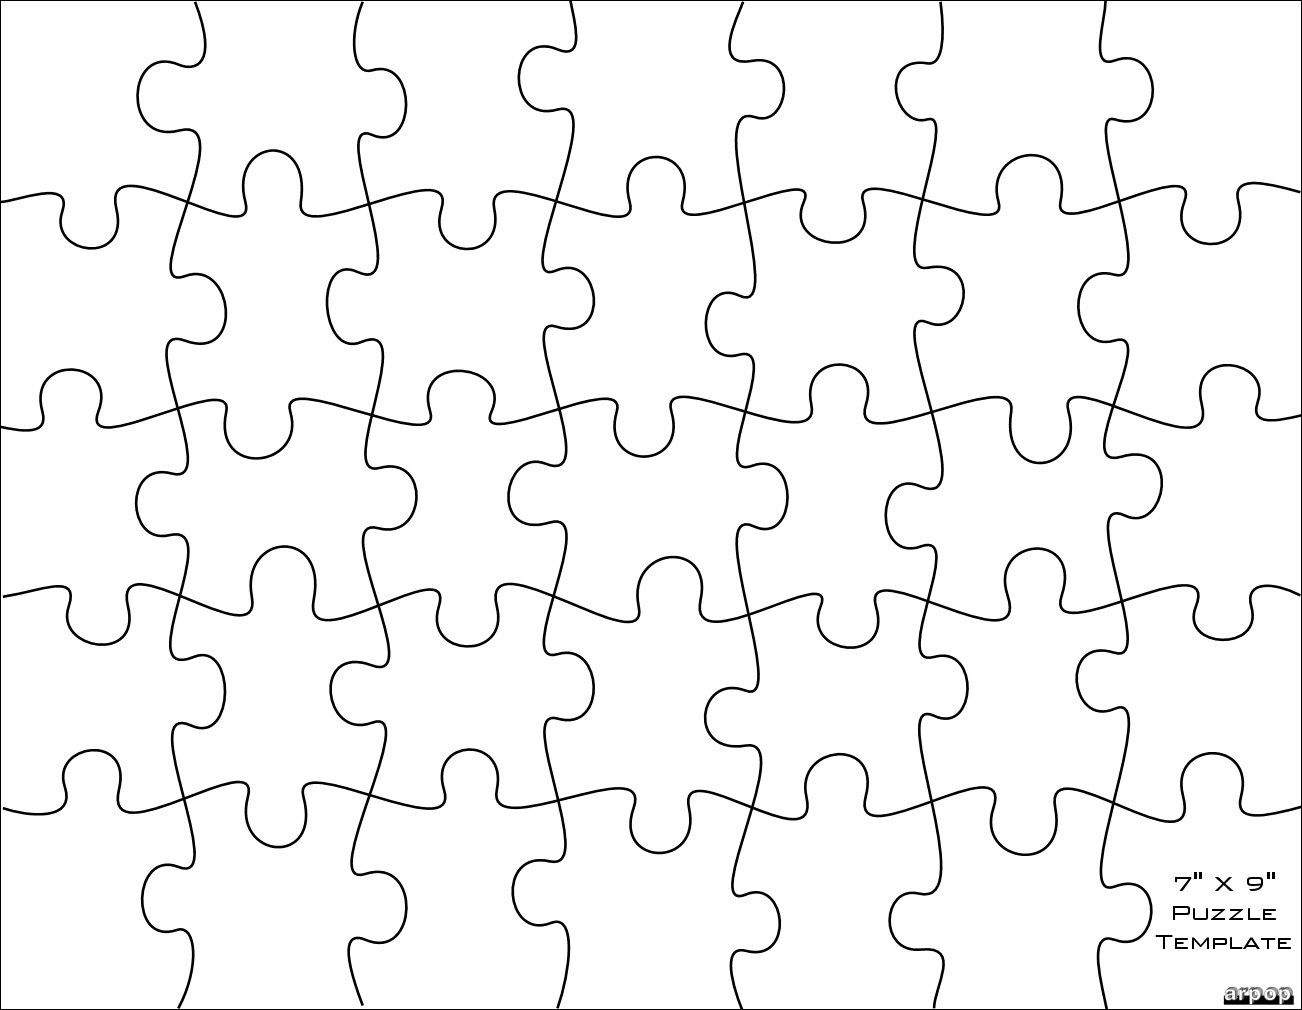 Free Scroll Saw Patternsarpop: Jigsaw Puzzle Templates | School - Printable Jigsaw Puzzle For Adults